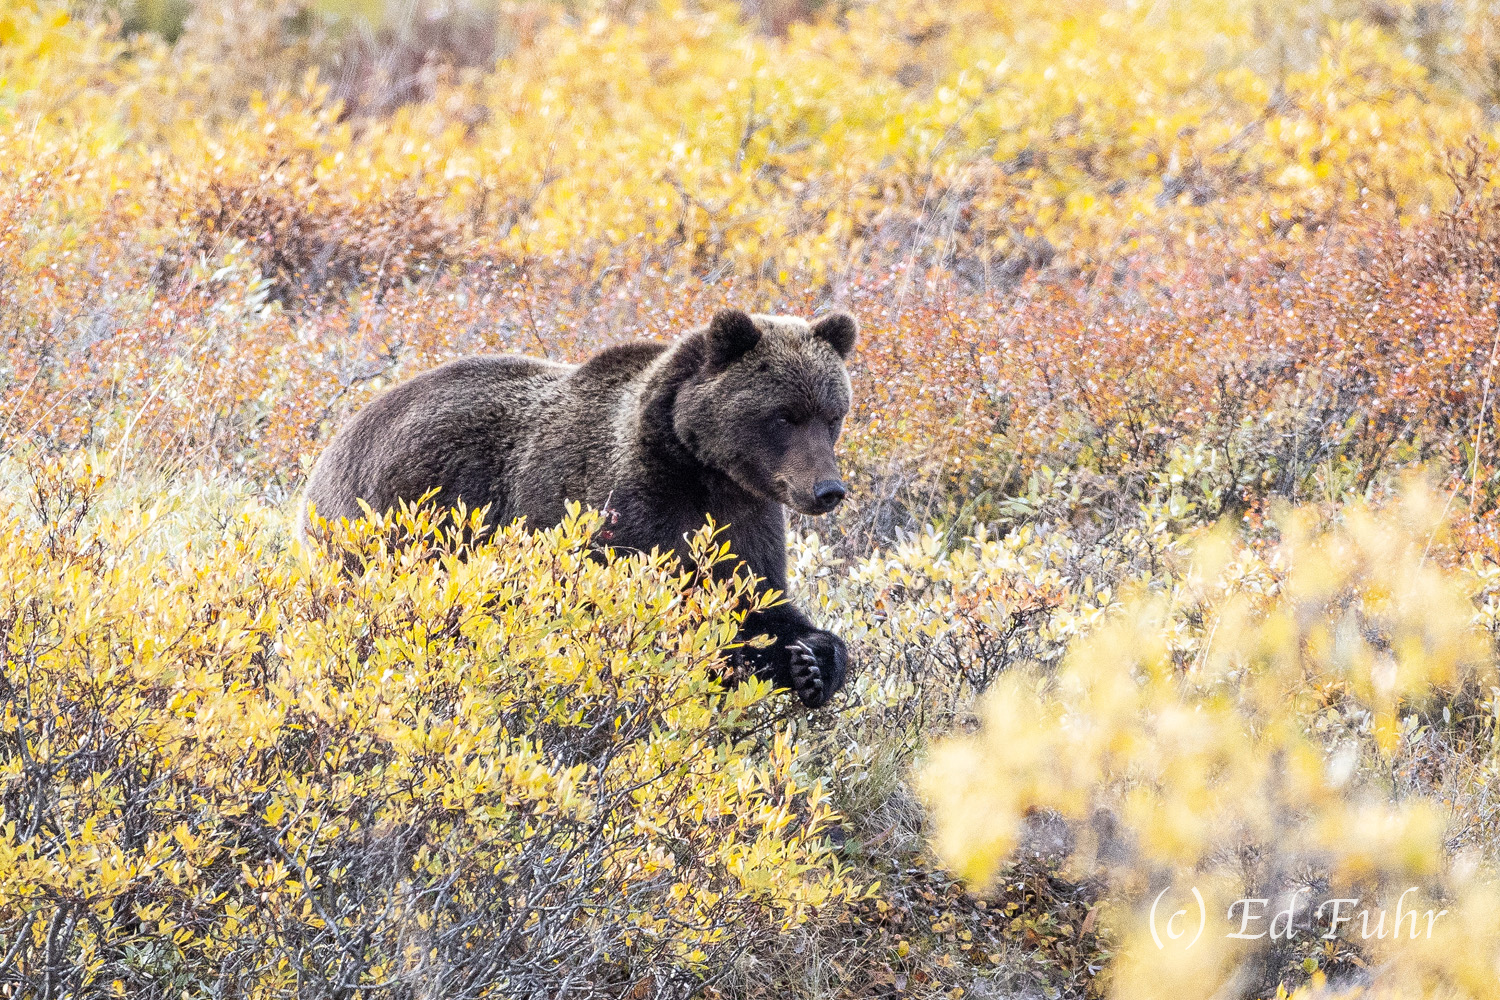 Darker than most Denali grizzlies, this large grizzly pounces on unsuspecting prey.